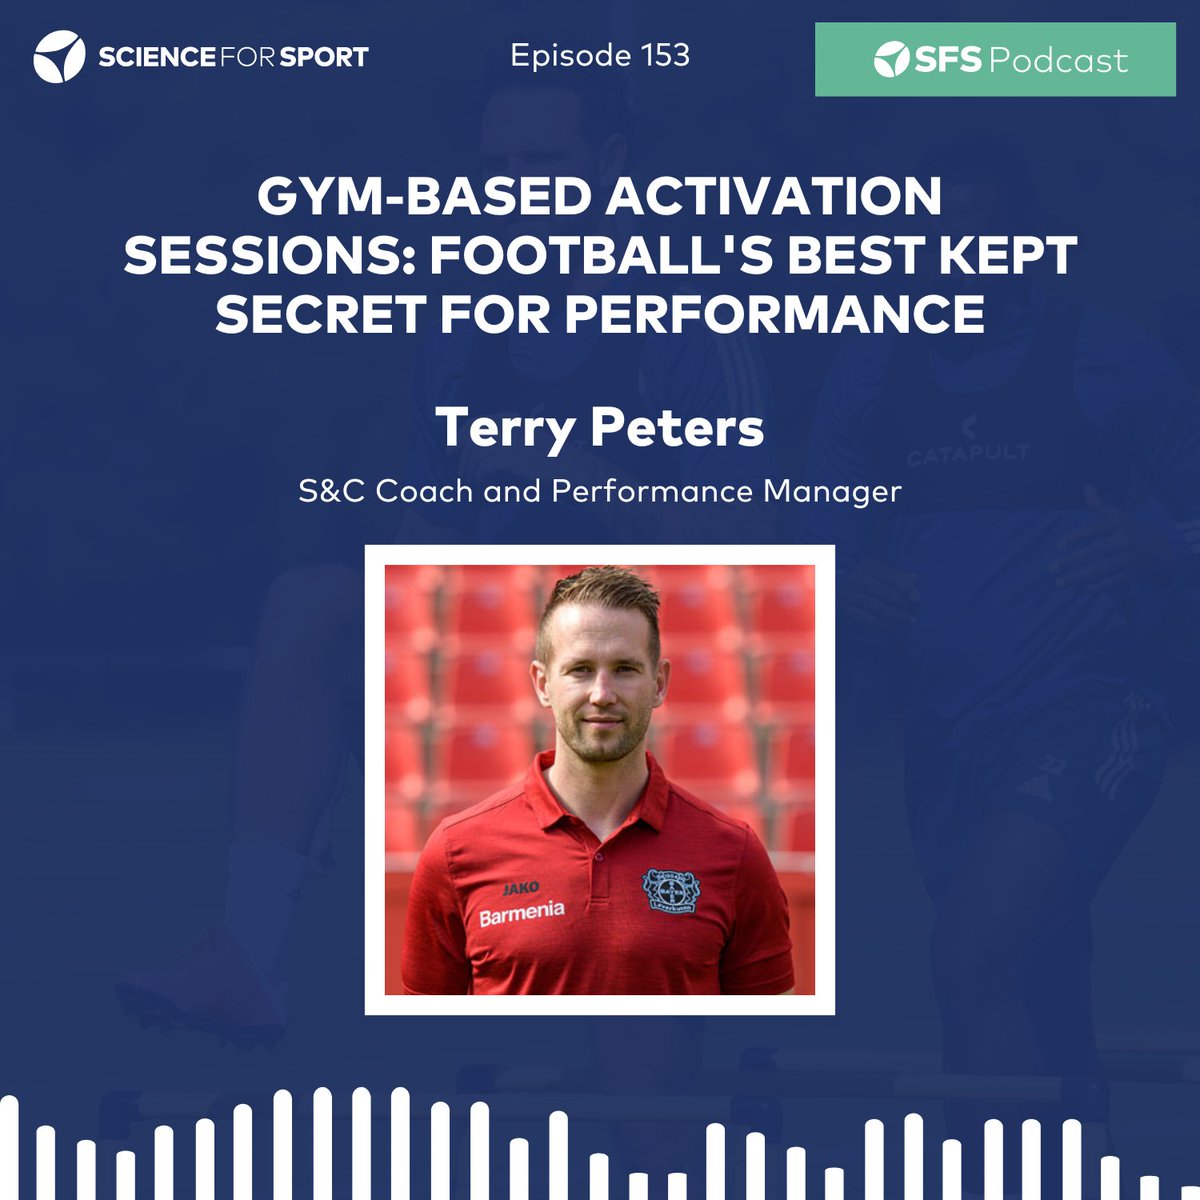 How do European level football teams perform activation work in the gym? Terry Peters talks to @Matt_Solomon110 about: 🏋️‍♂️ Why footballers should train in the gym 🔄 How the gym impacts field based performance 📈 Activation sessions for performance scienceforsport.fireside.fm/153